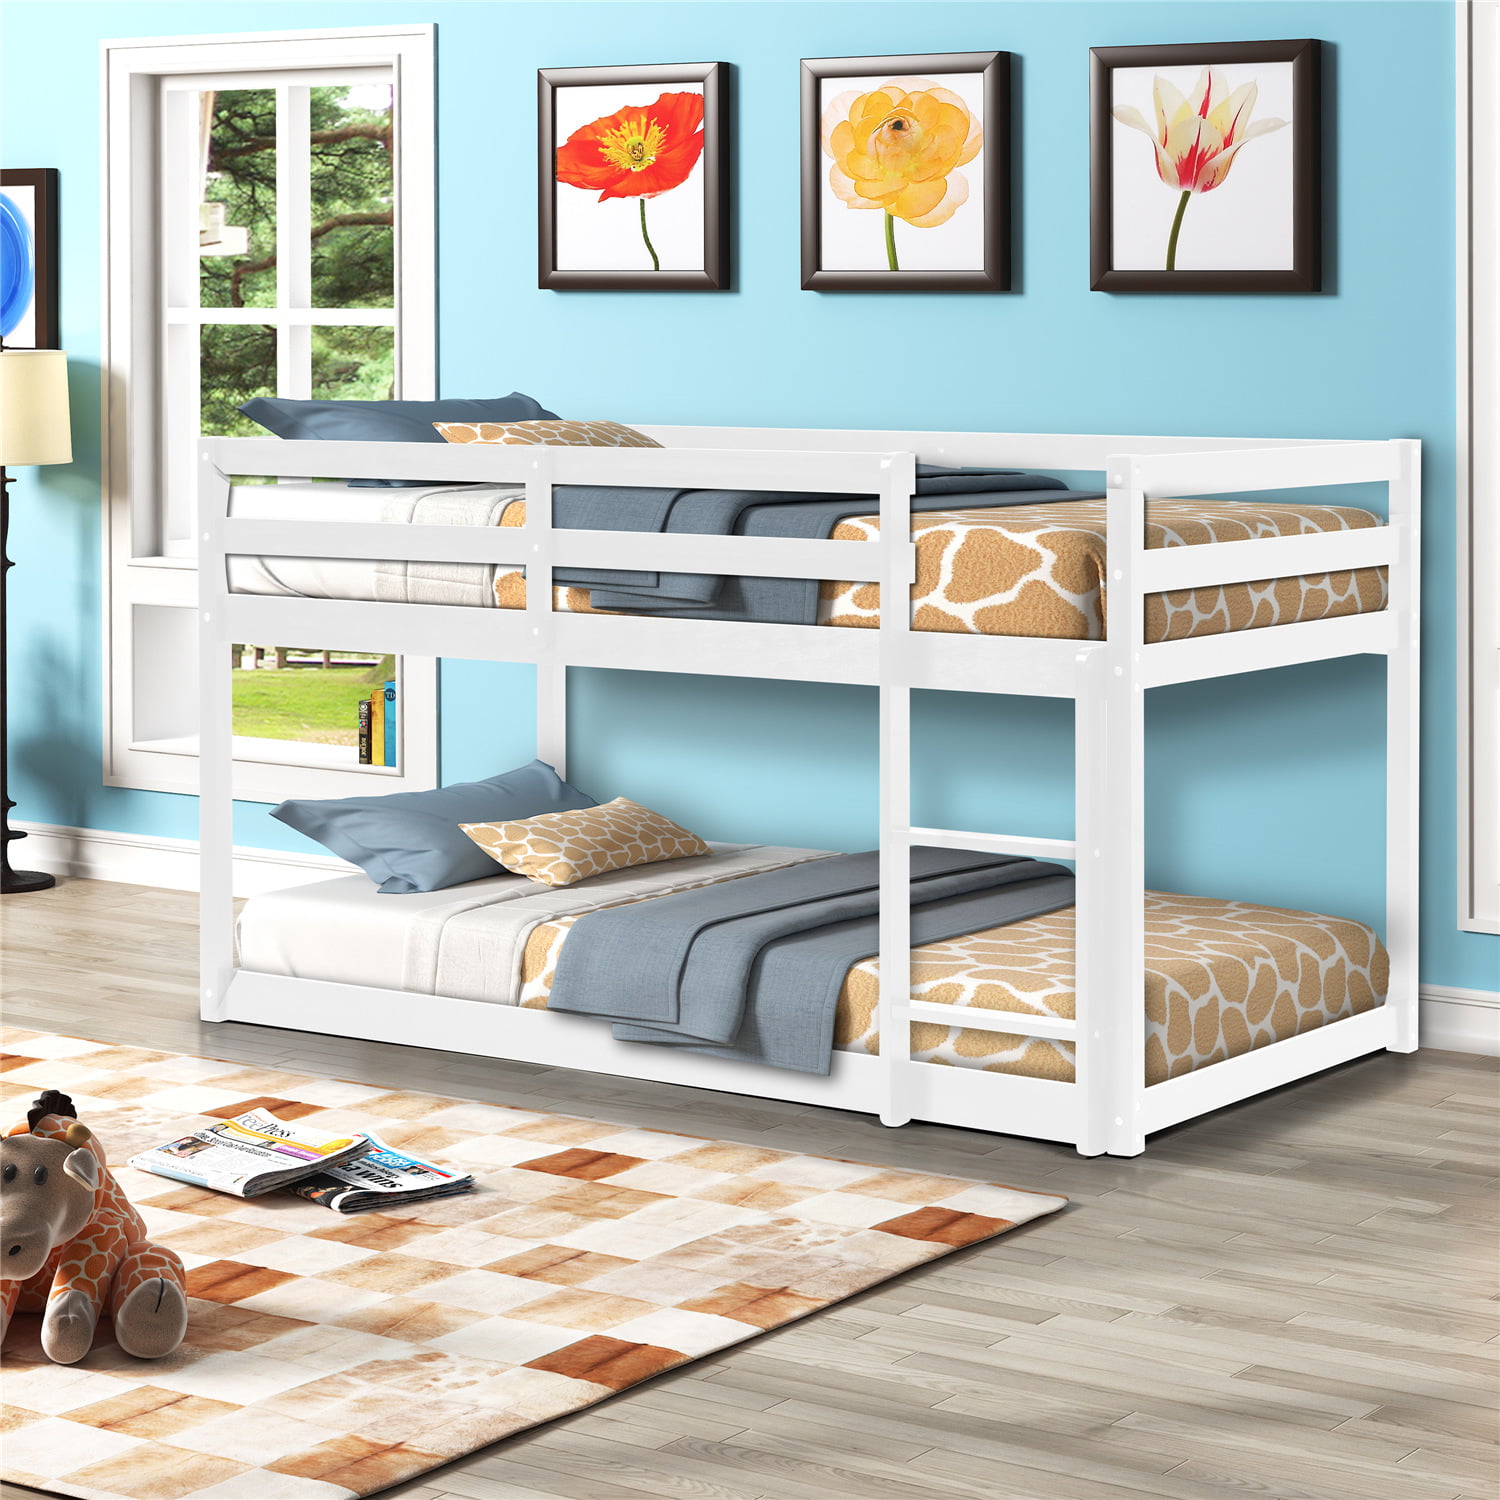 Triple Bunk Bed 3 Beds Twin Over, Detachable Twin Bunk Beds